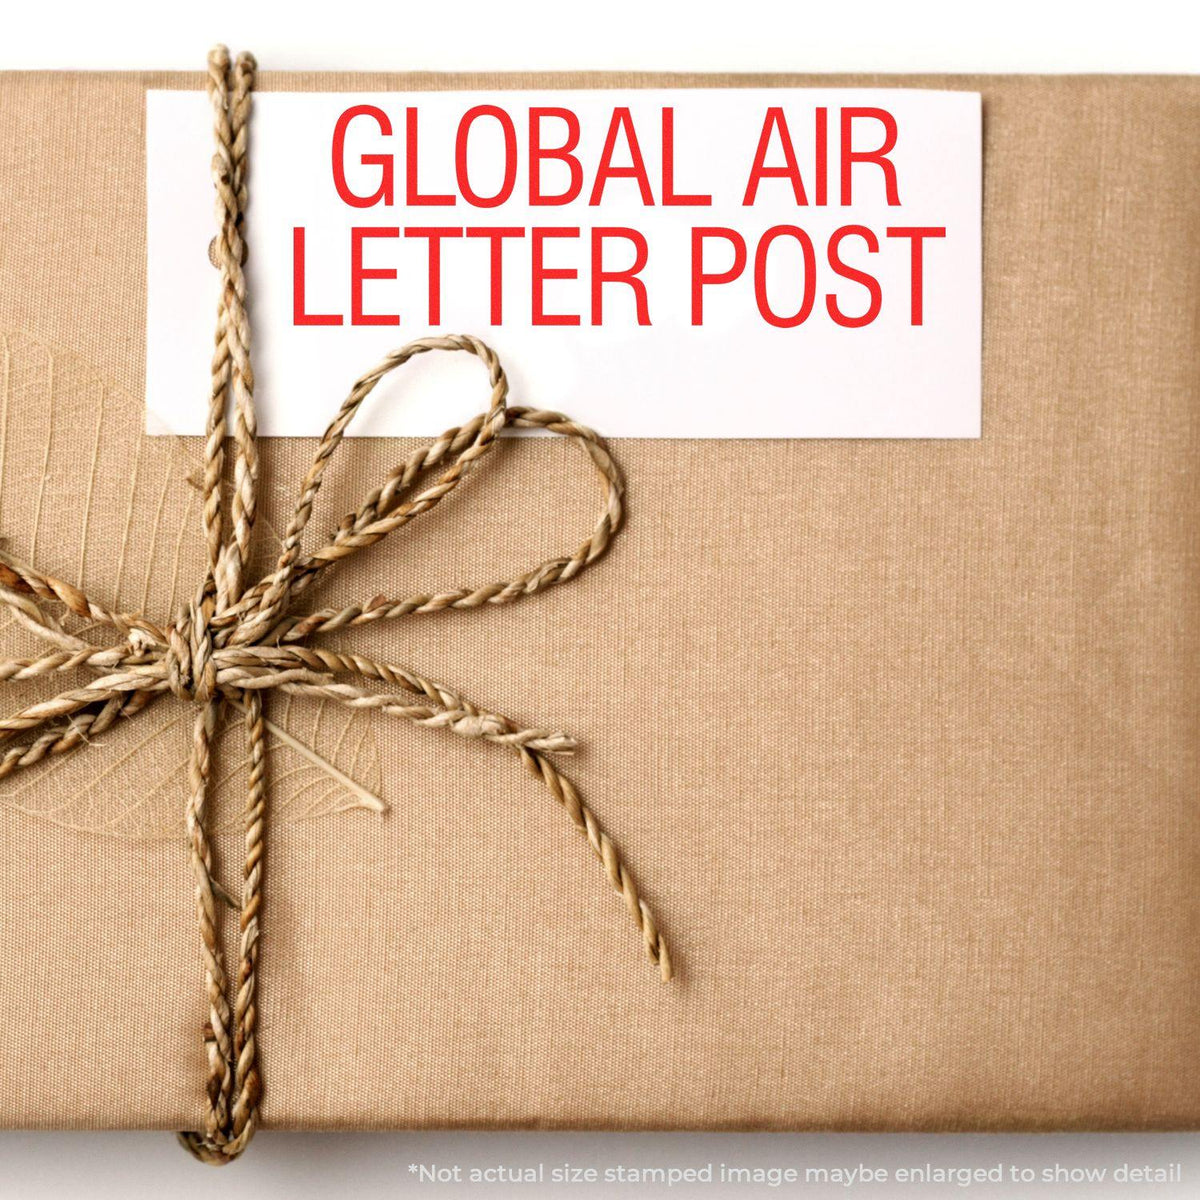 In Use Large Global Air Letter Post Rubber Stamp Image